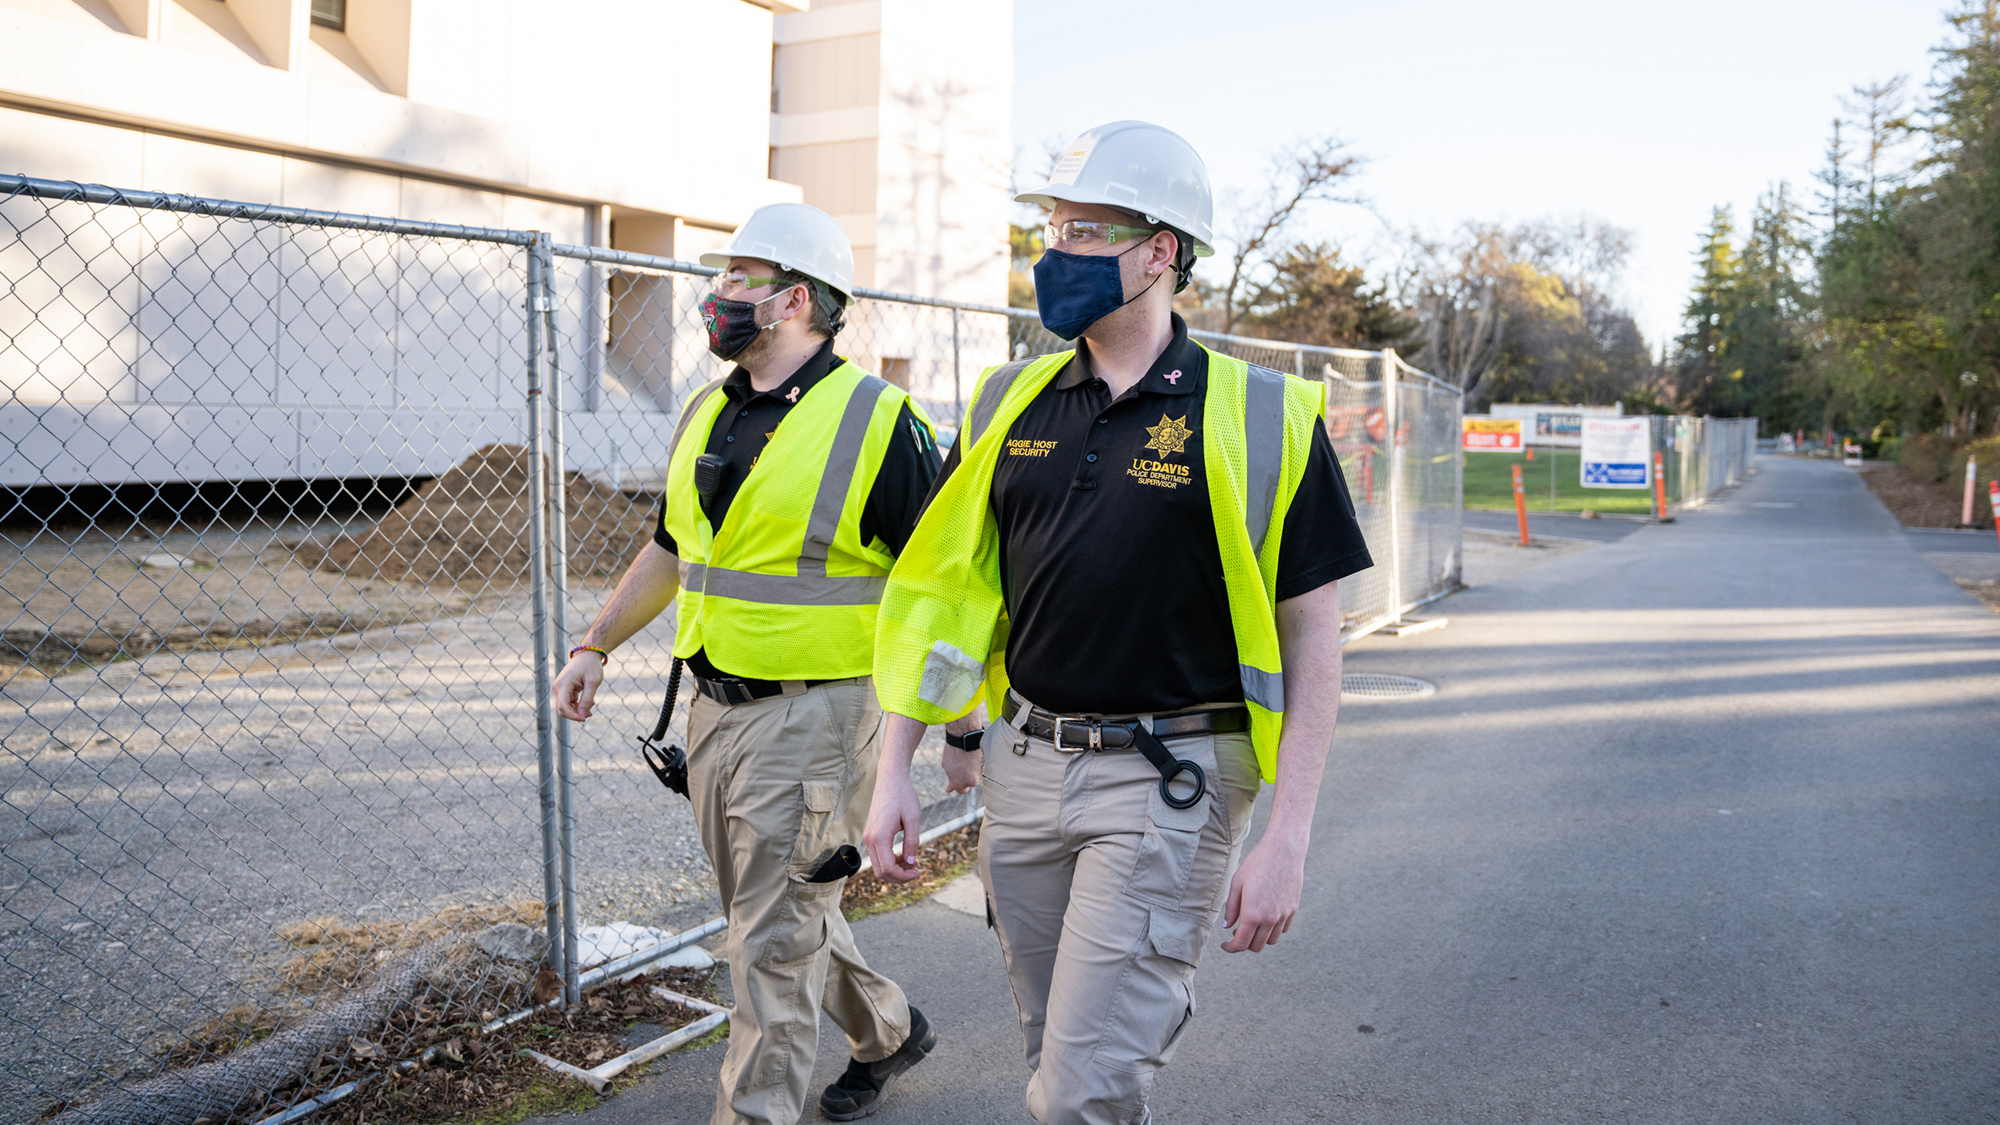 Aggie Hosts monitoring a construction site for compliance with public health guidelines